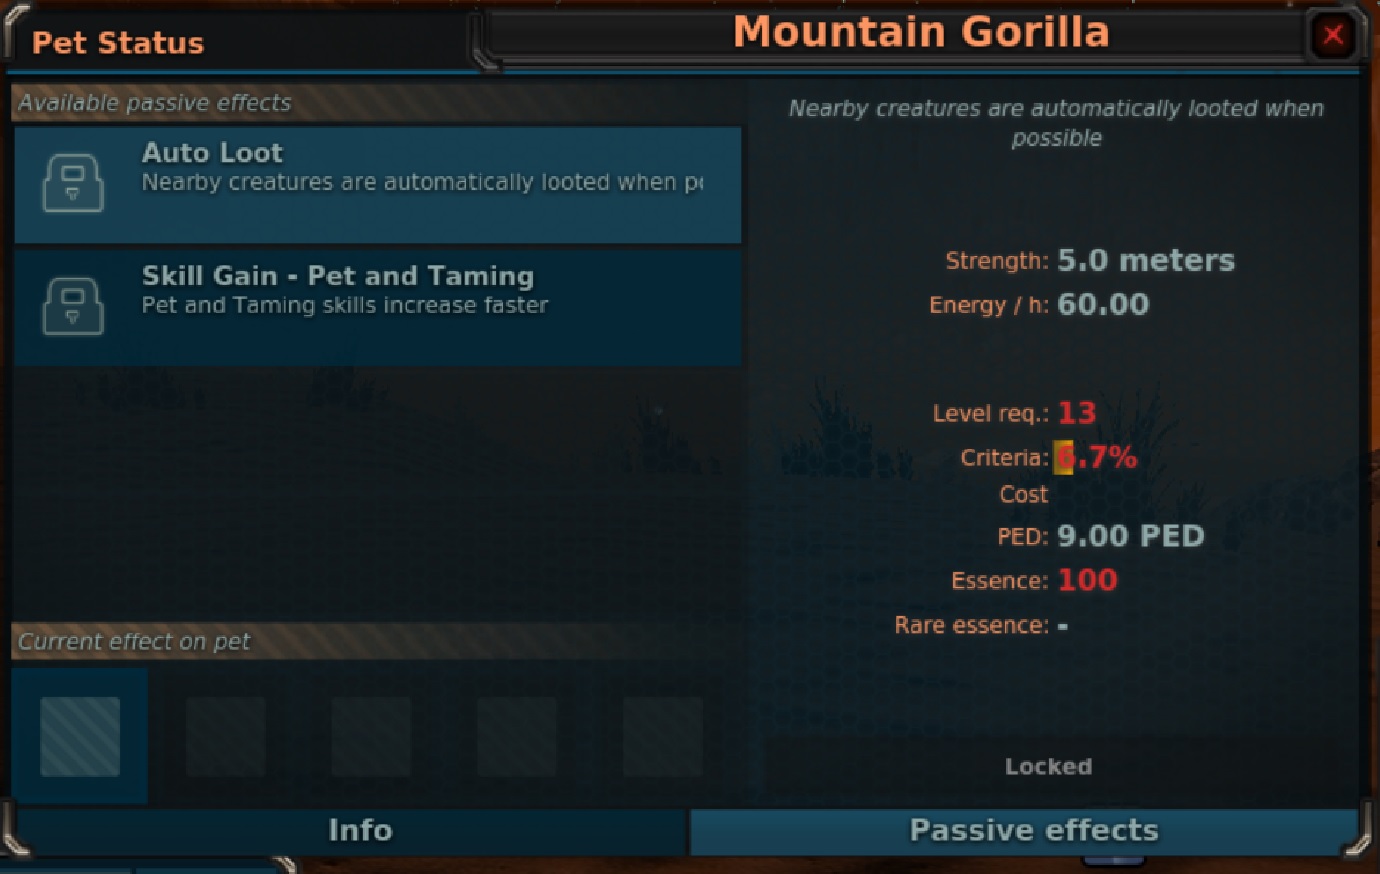 Mountain Gorilla with auto loot feature